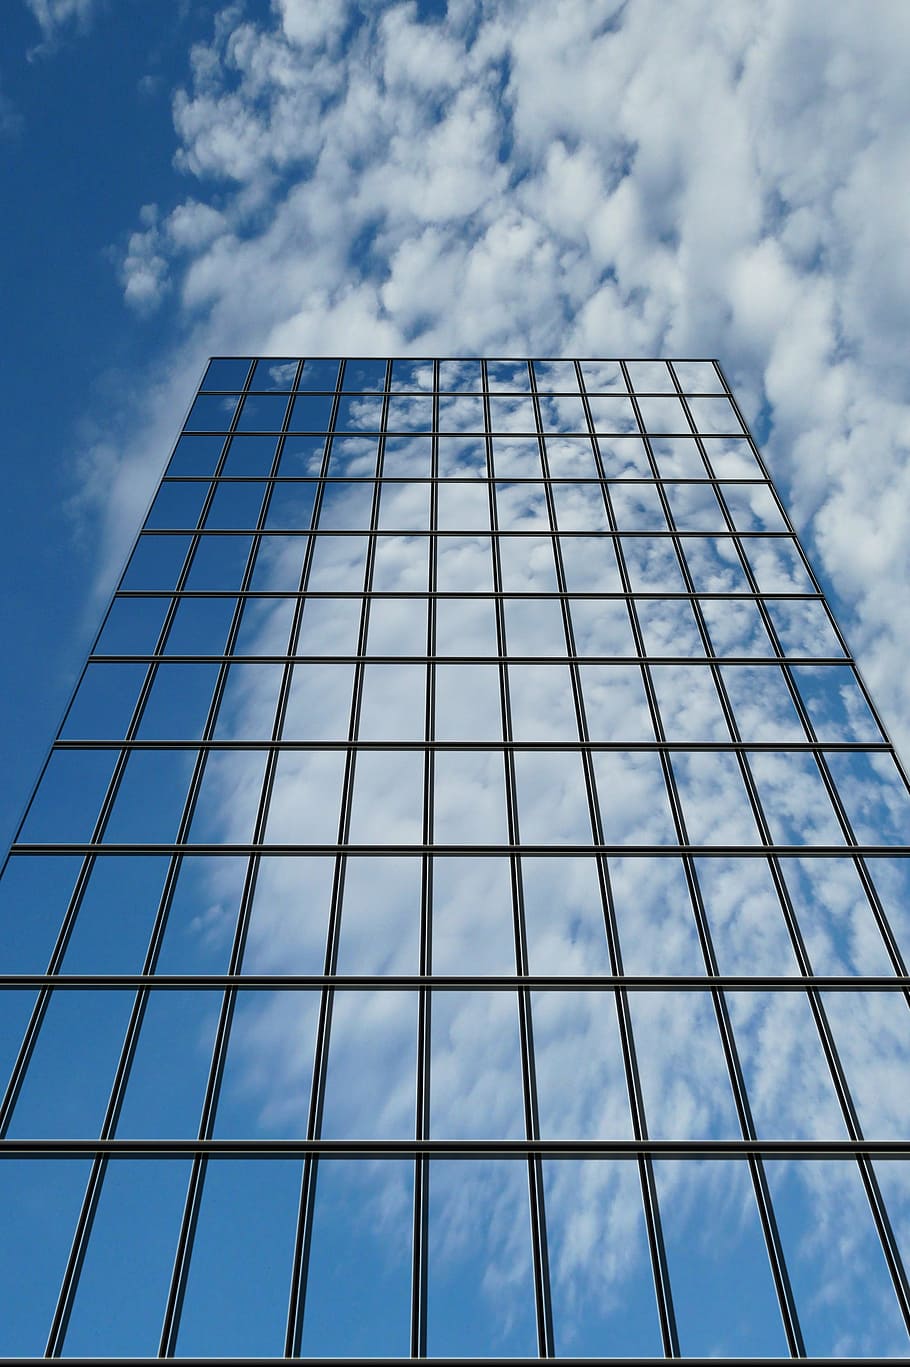 low-angle photography, glass curtain building, skyscraper, clouds, reflect, mirror, window, replacement mirrors, cloud computing, cloud